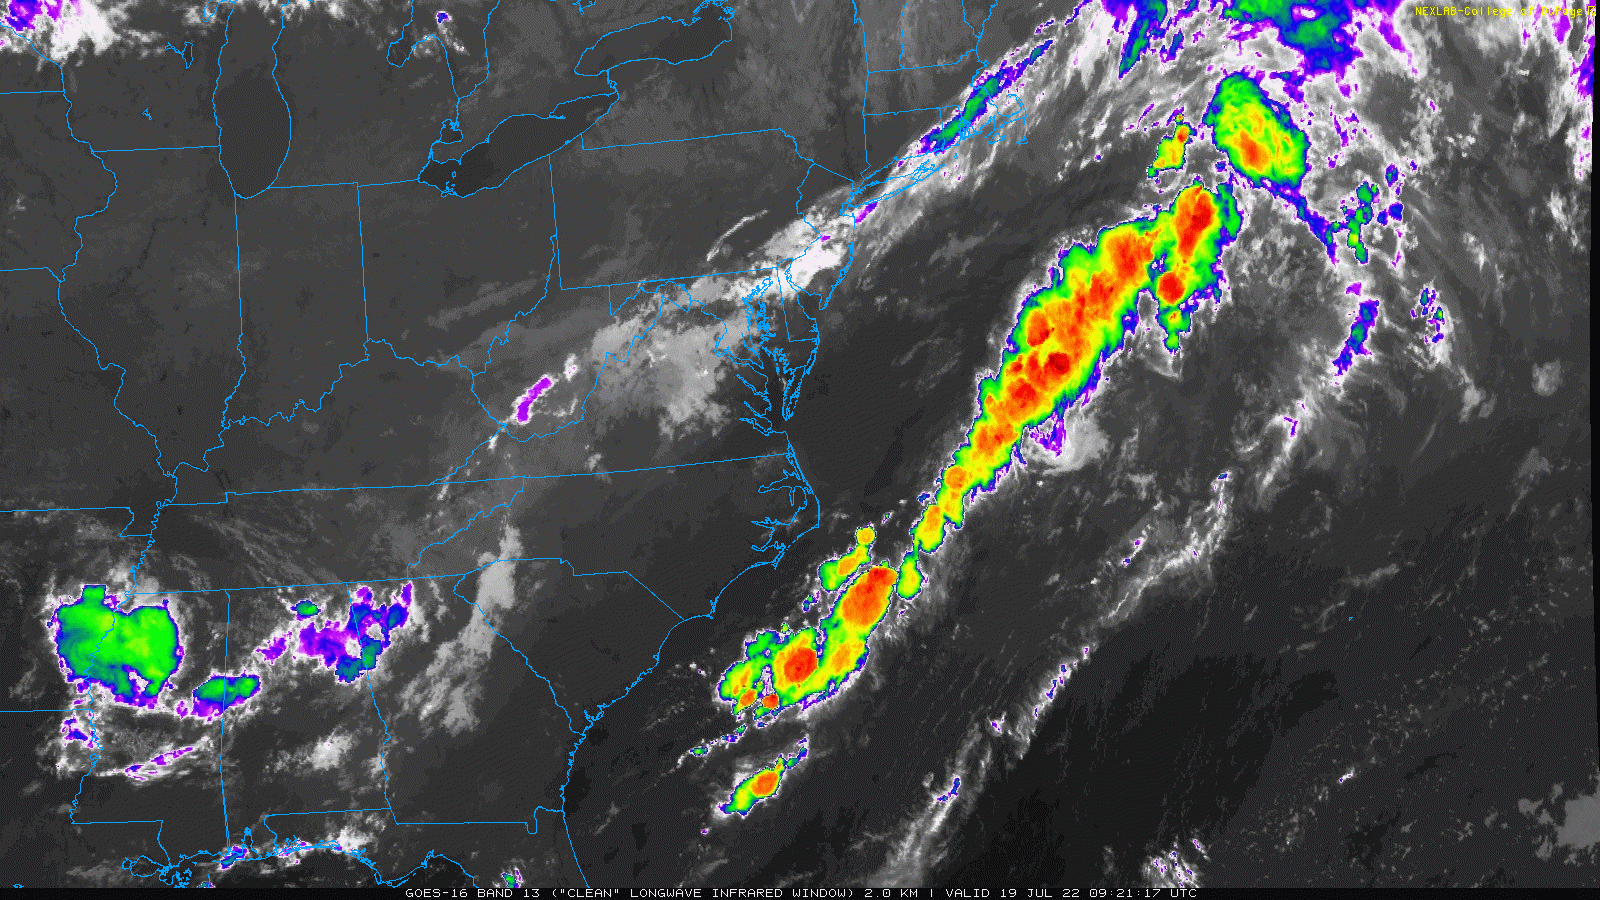 July-19-weather-satellite-clouds-tuesday-morning